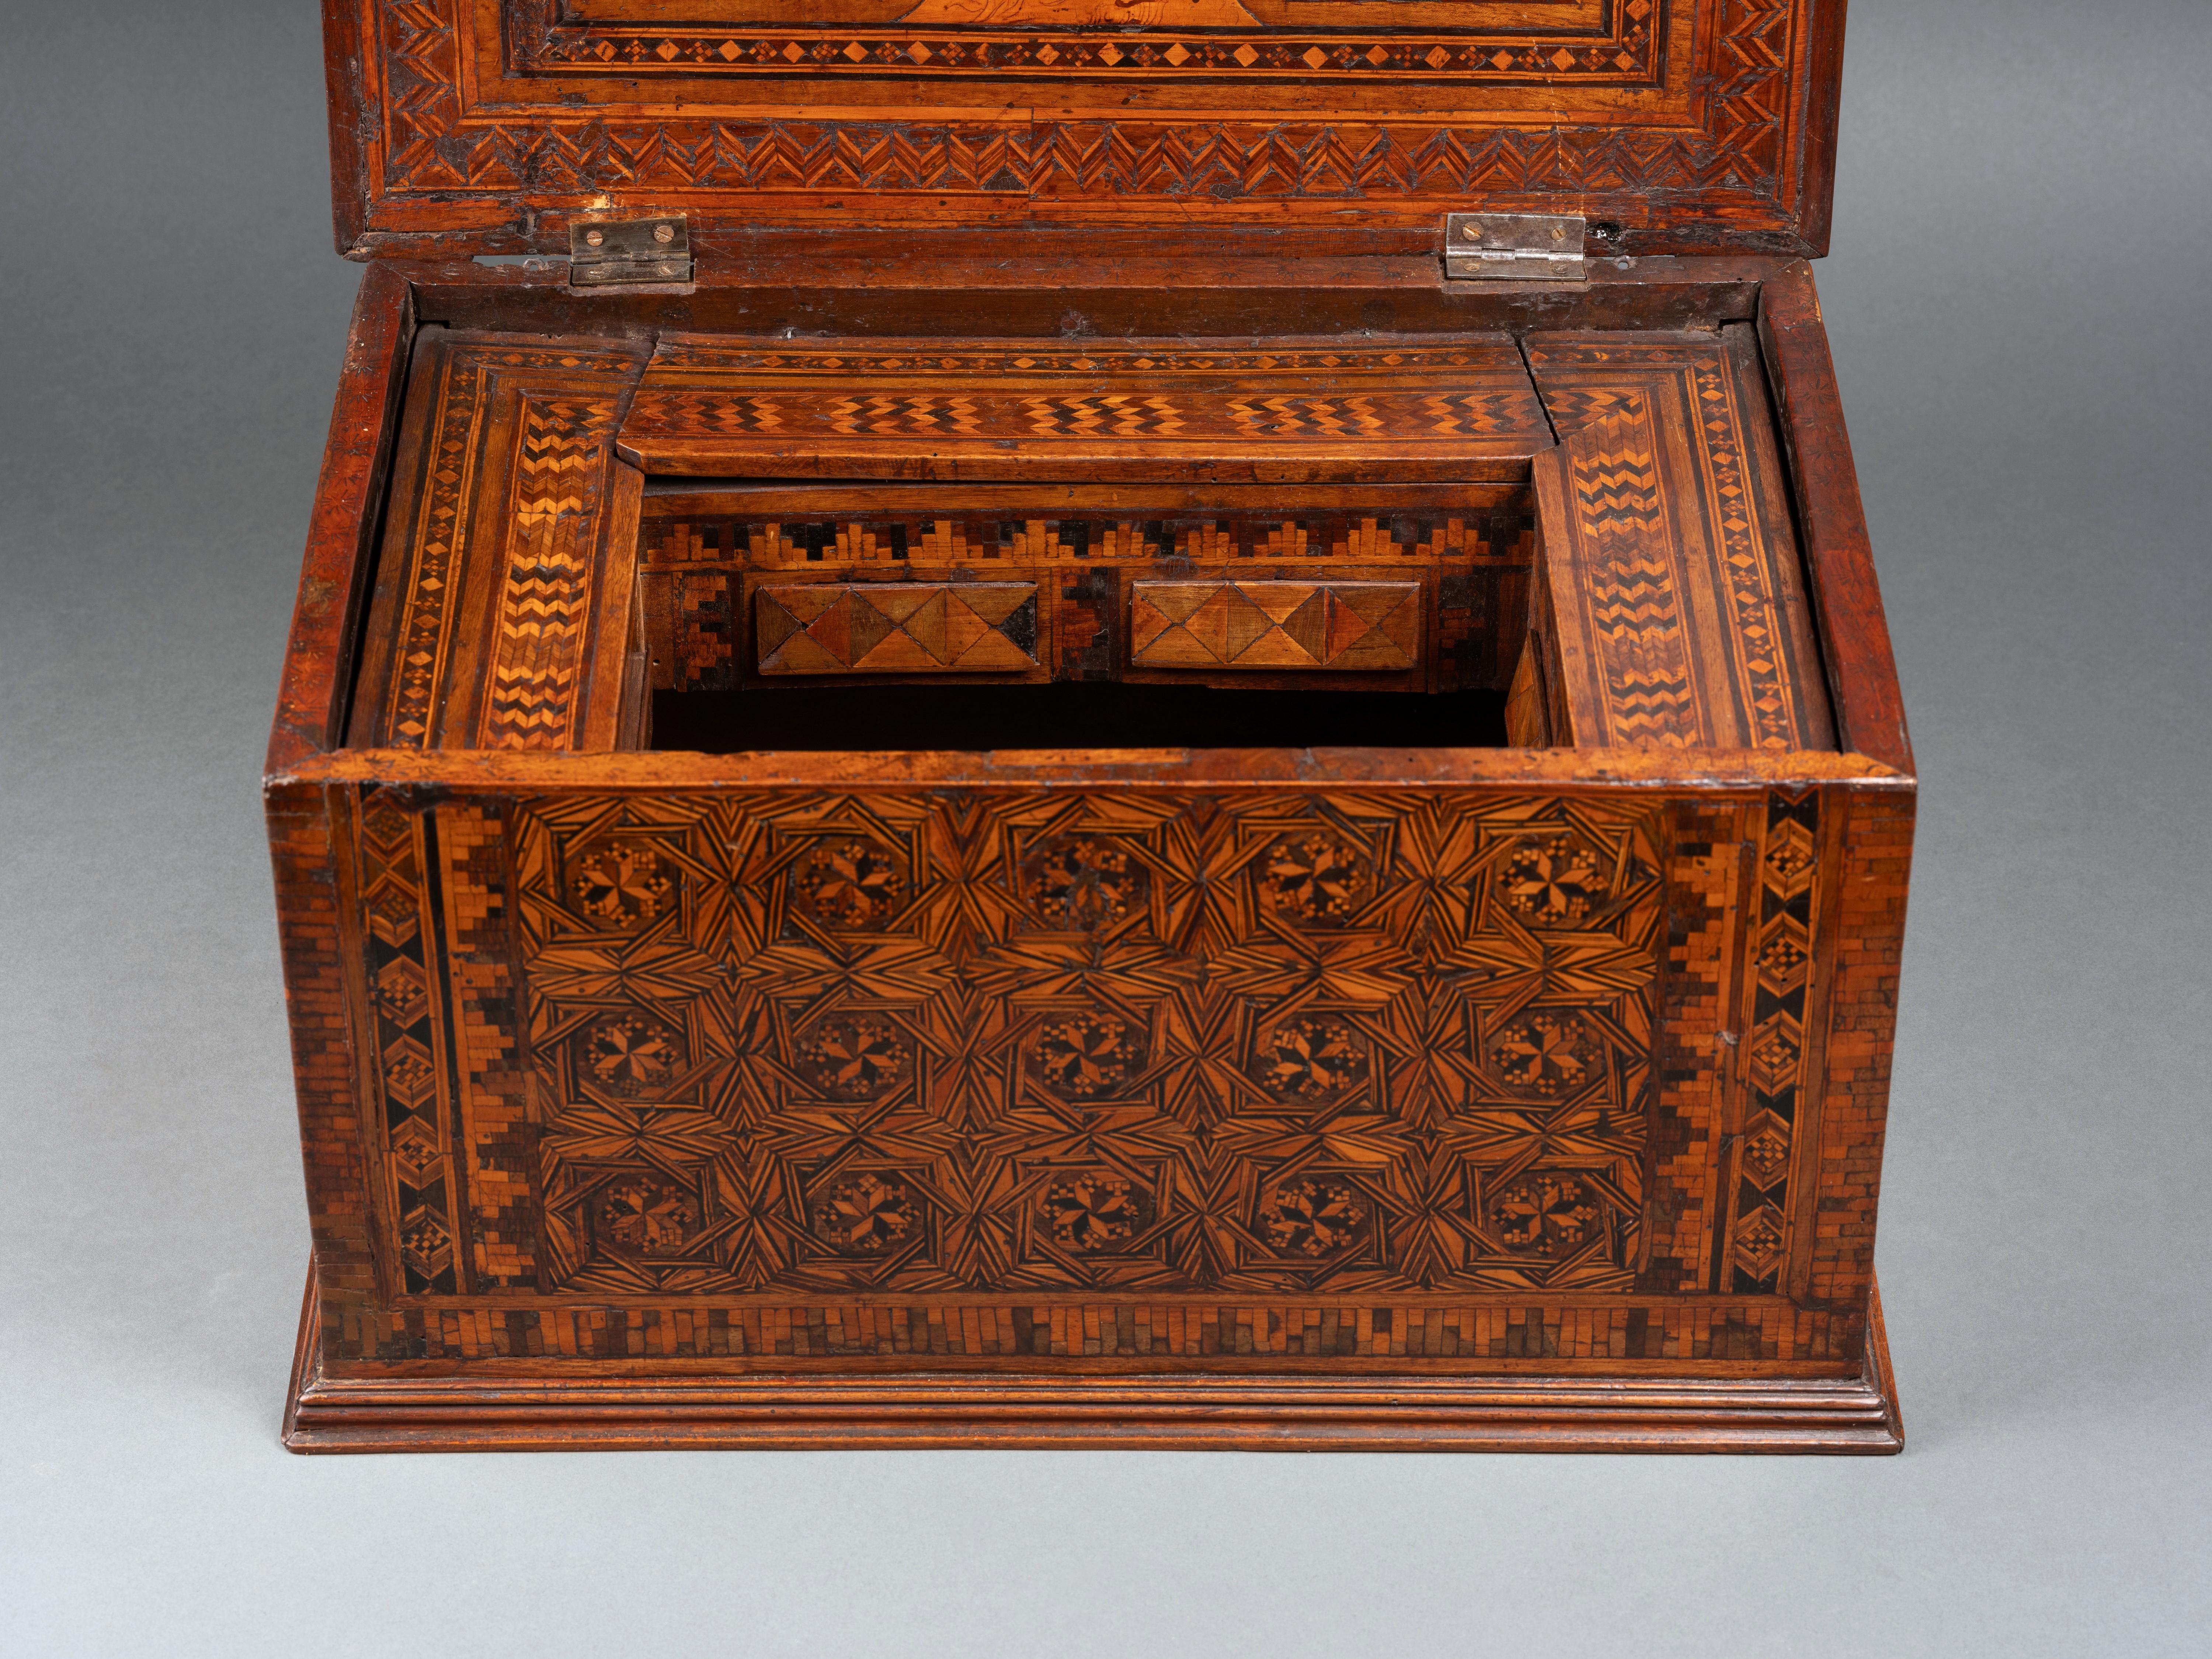 Italian A late 15th century  wood inlaid writing casket, Florence, Italy